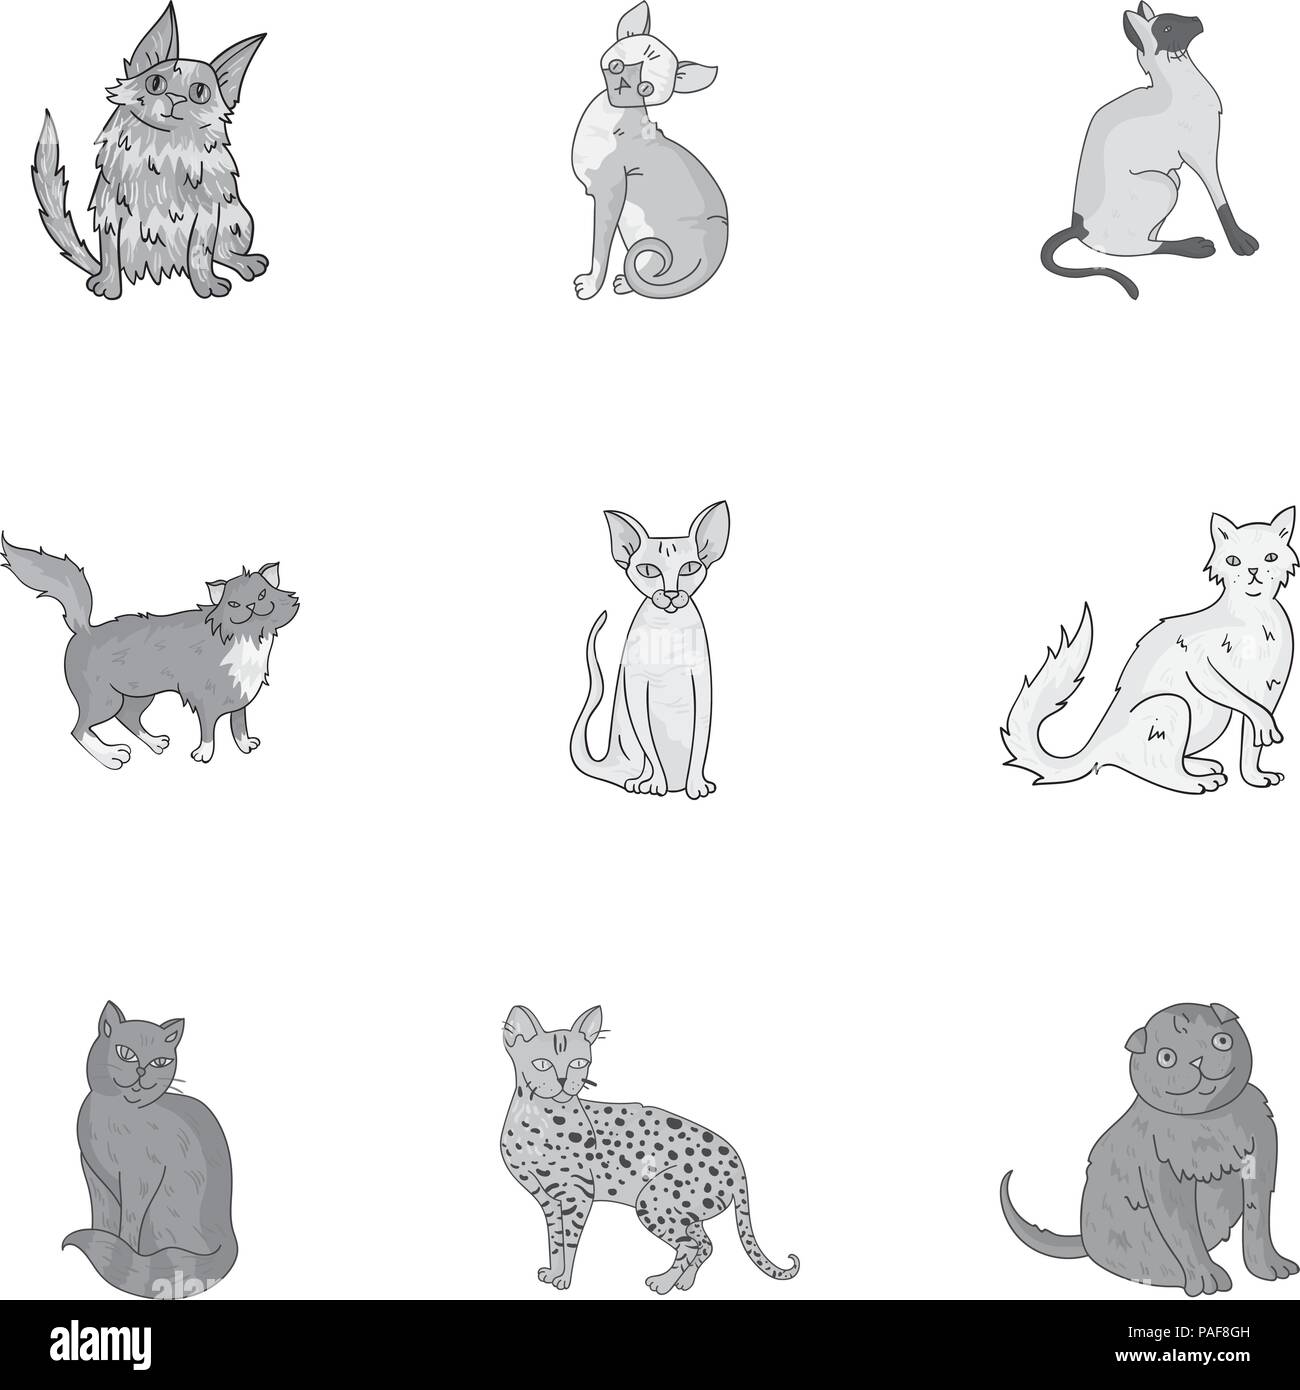 bald,cat,cats,chest,collection,curly,different,ears,egyptian,evil,fat,good,gray,icon,illustration,isolated,leopard,logo,monochrome,neck,object,one,picture,set,sign,sphinx,spotted,striped,symbol,tail,thin,vector,web,white, Vector Vectors , Stock Vector